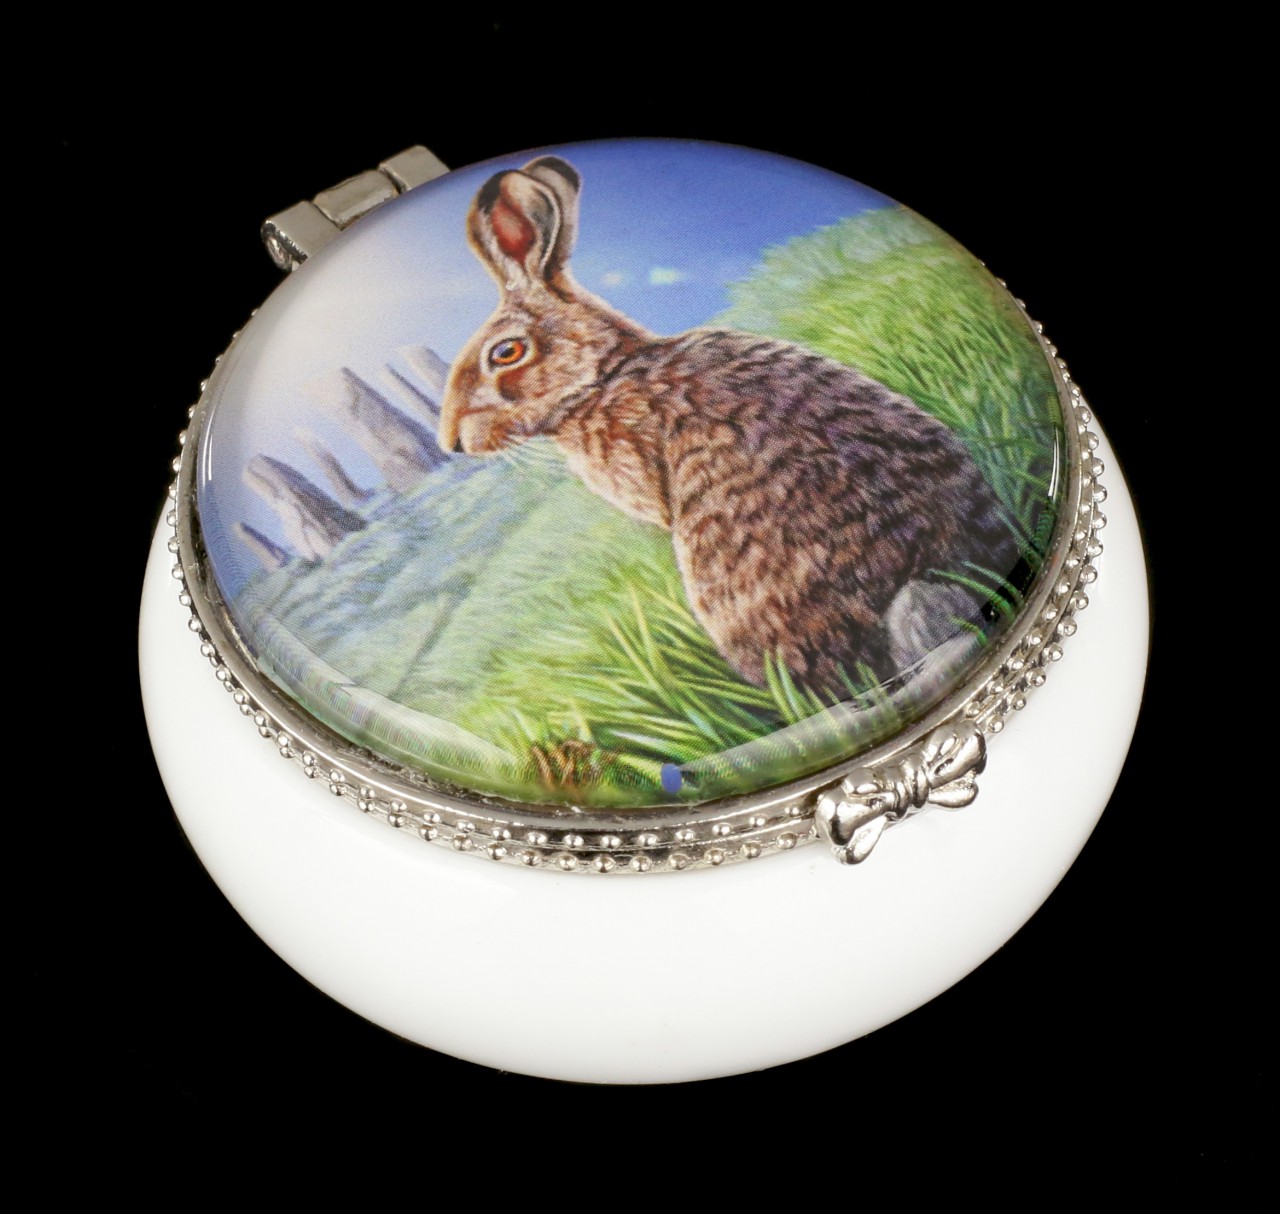 Trinket Box with Hare - Solstice